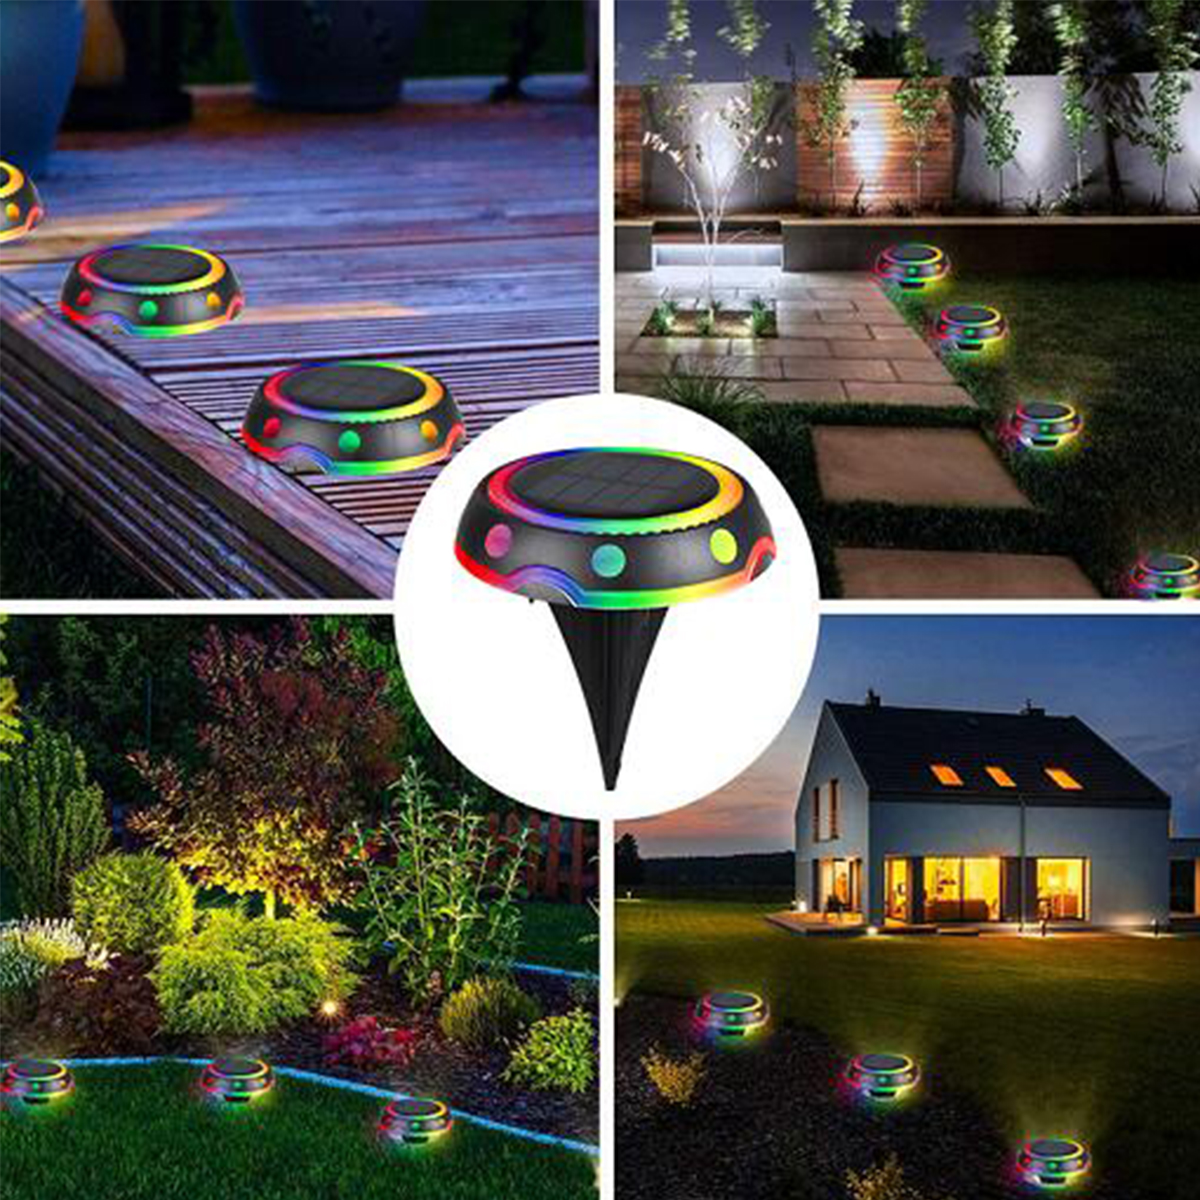 RGB-LED-Solar-Light-Colour-Changing-Ground-Buried-Garden-Lawn-Path-Outdoor-Lamp-1823442-8